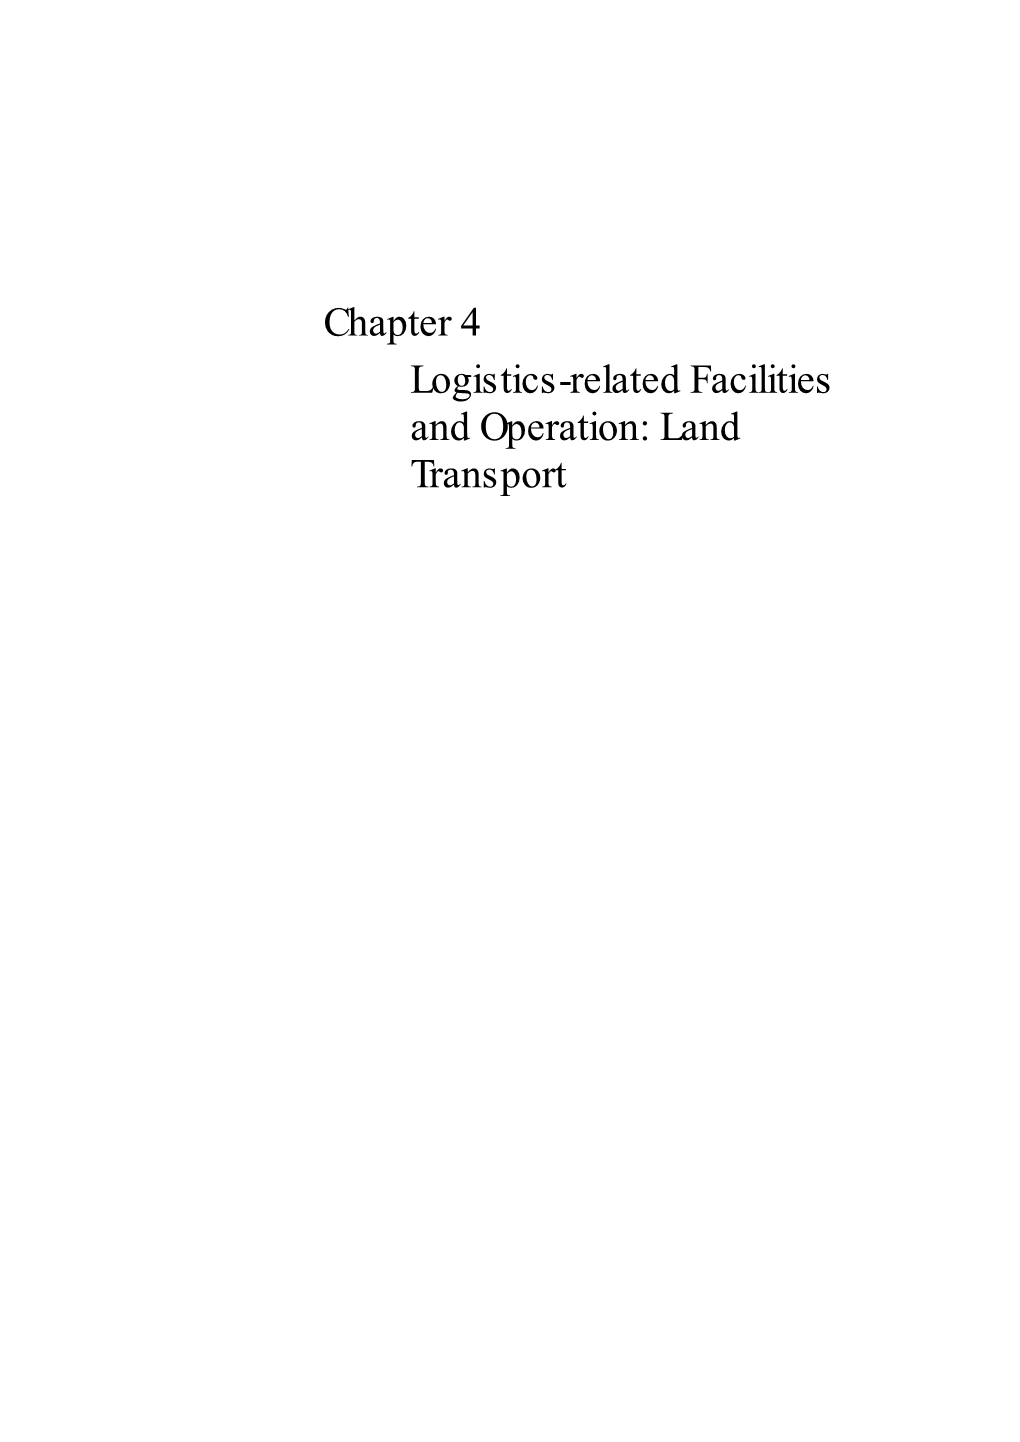 Chapter 4 Logistics-Related Facilities and Operation: Land Transport